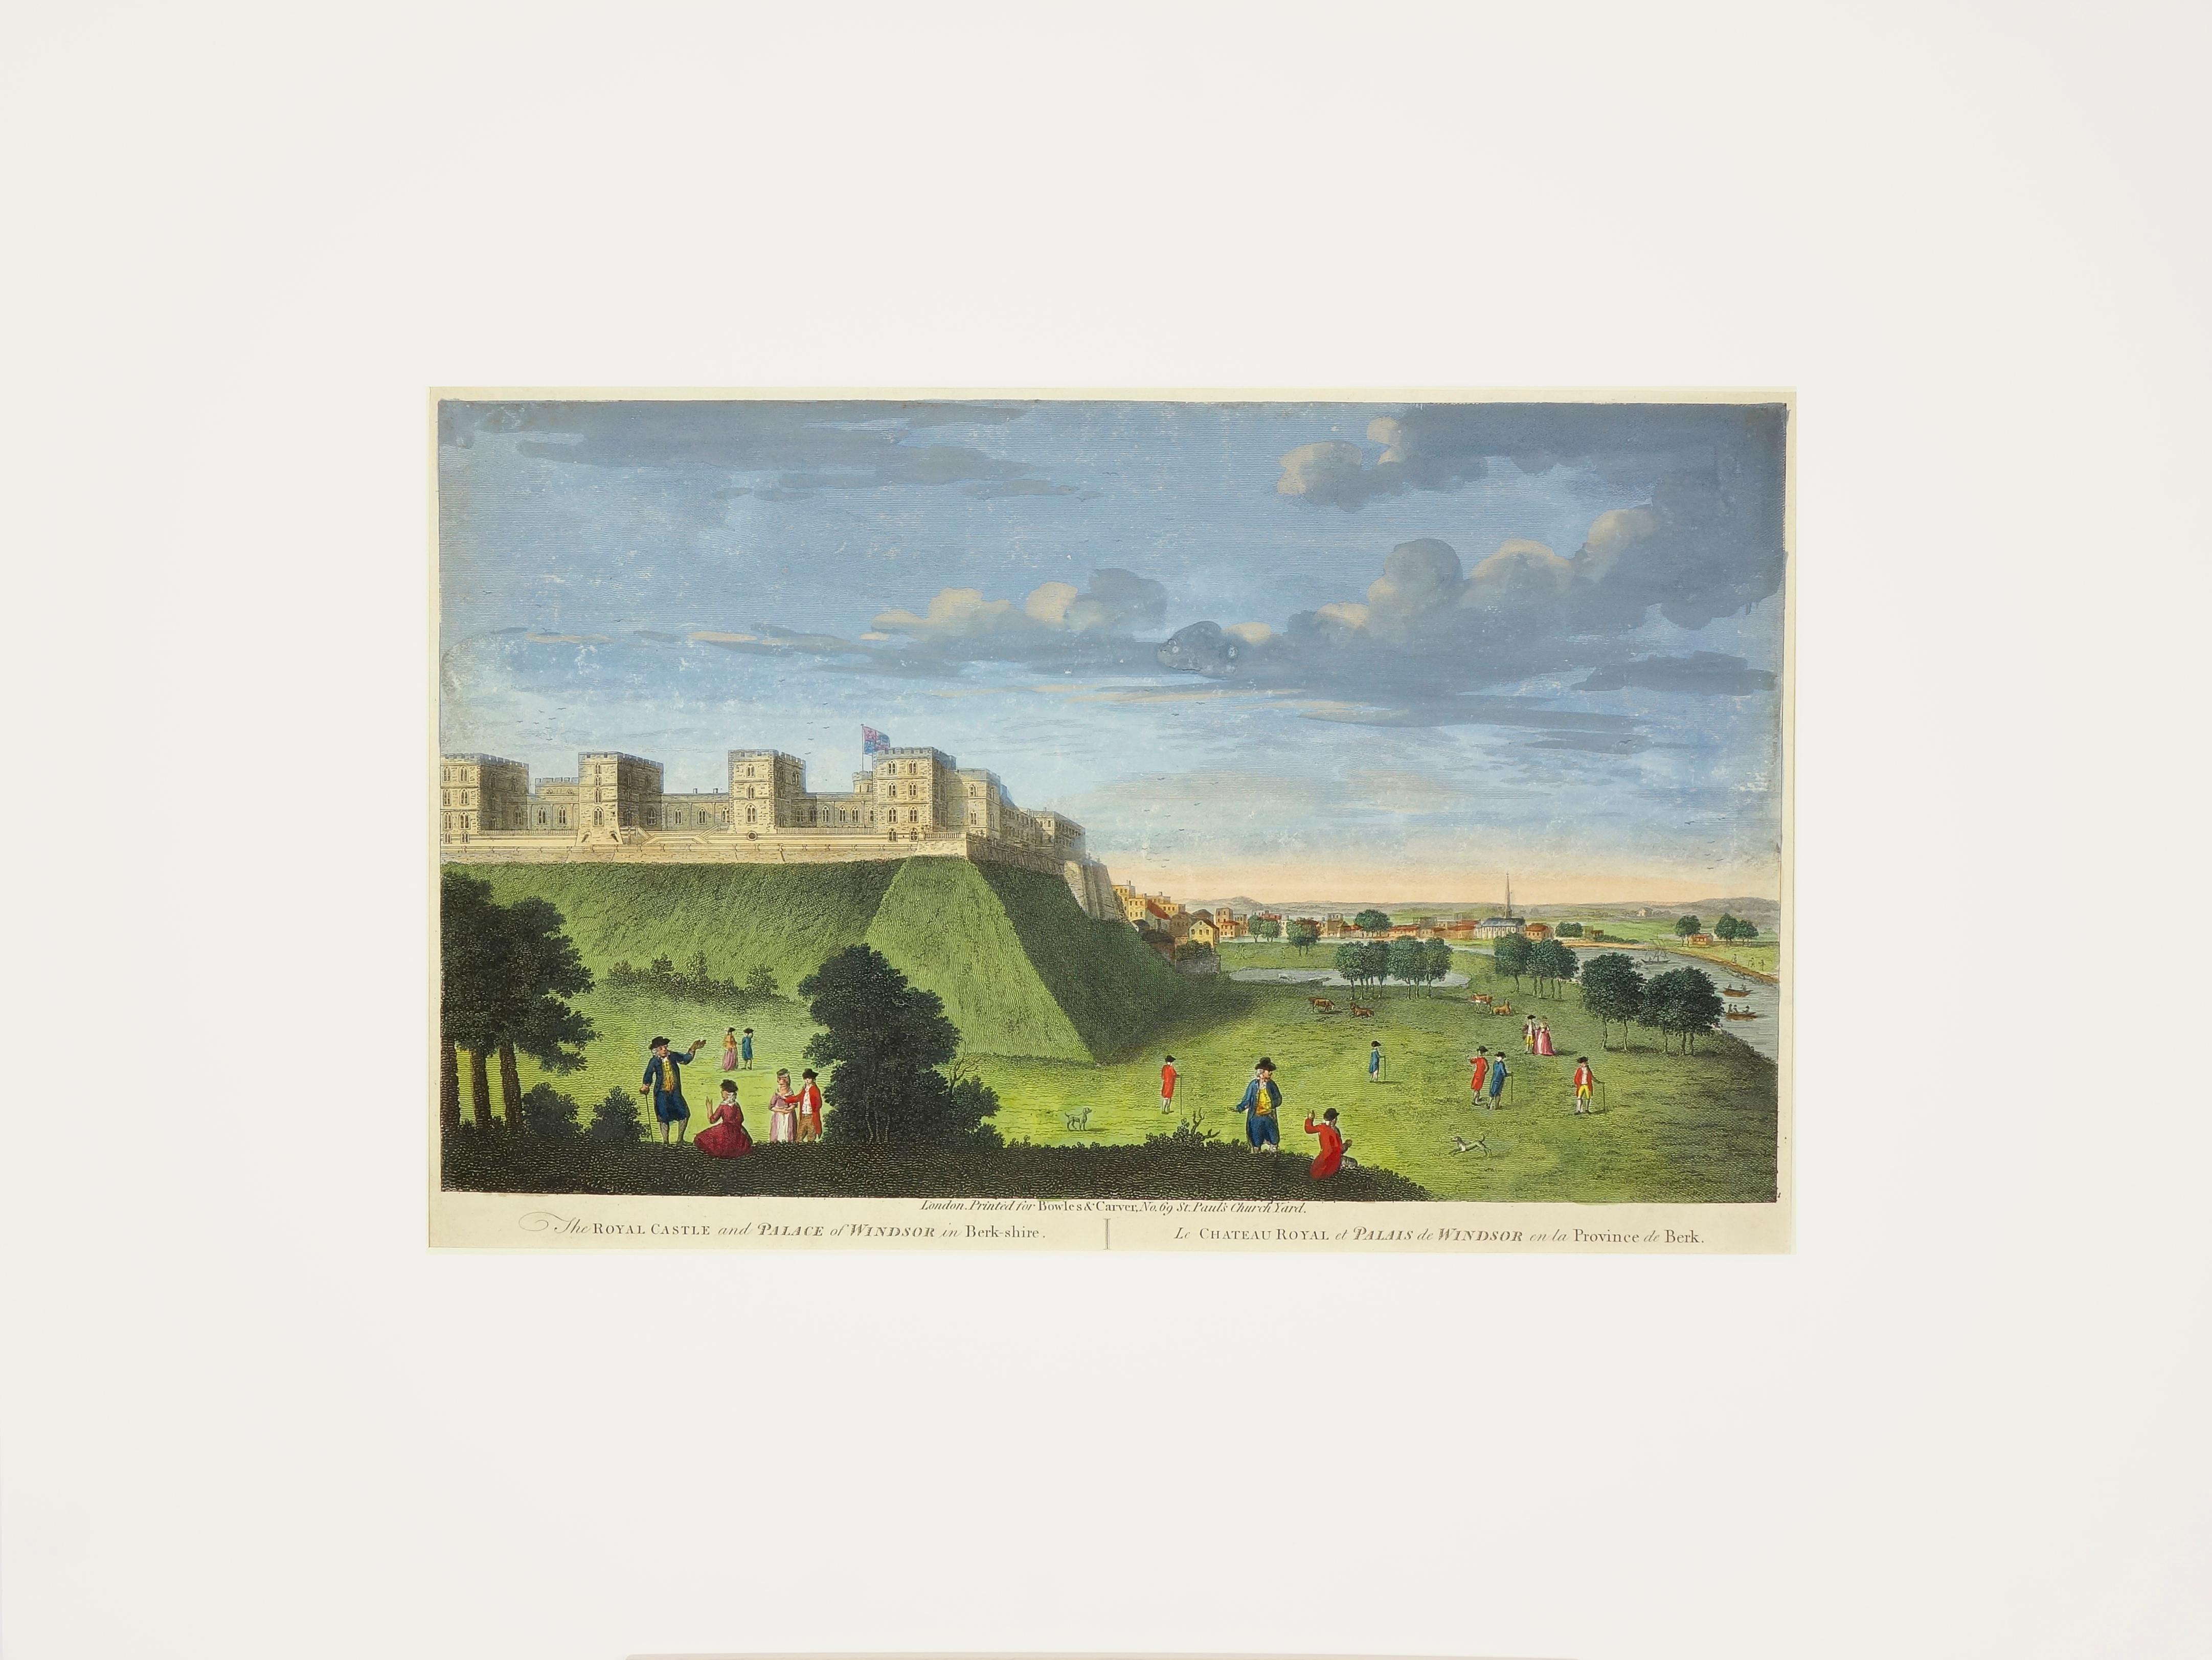 Unknown Landscape Print - The Royal Castle and Palace of Windsor Original copper plate engraving